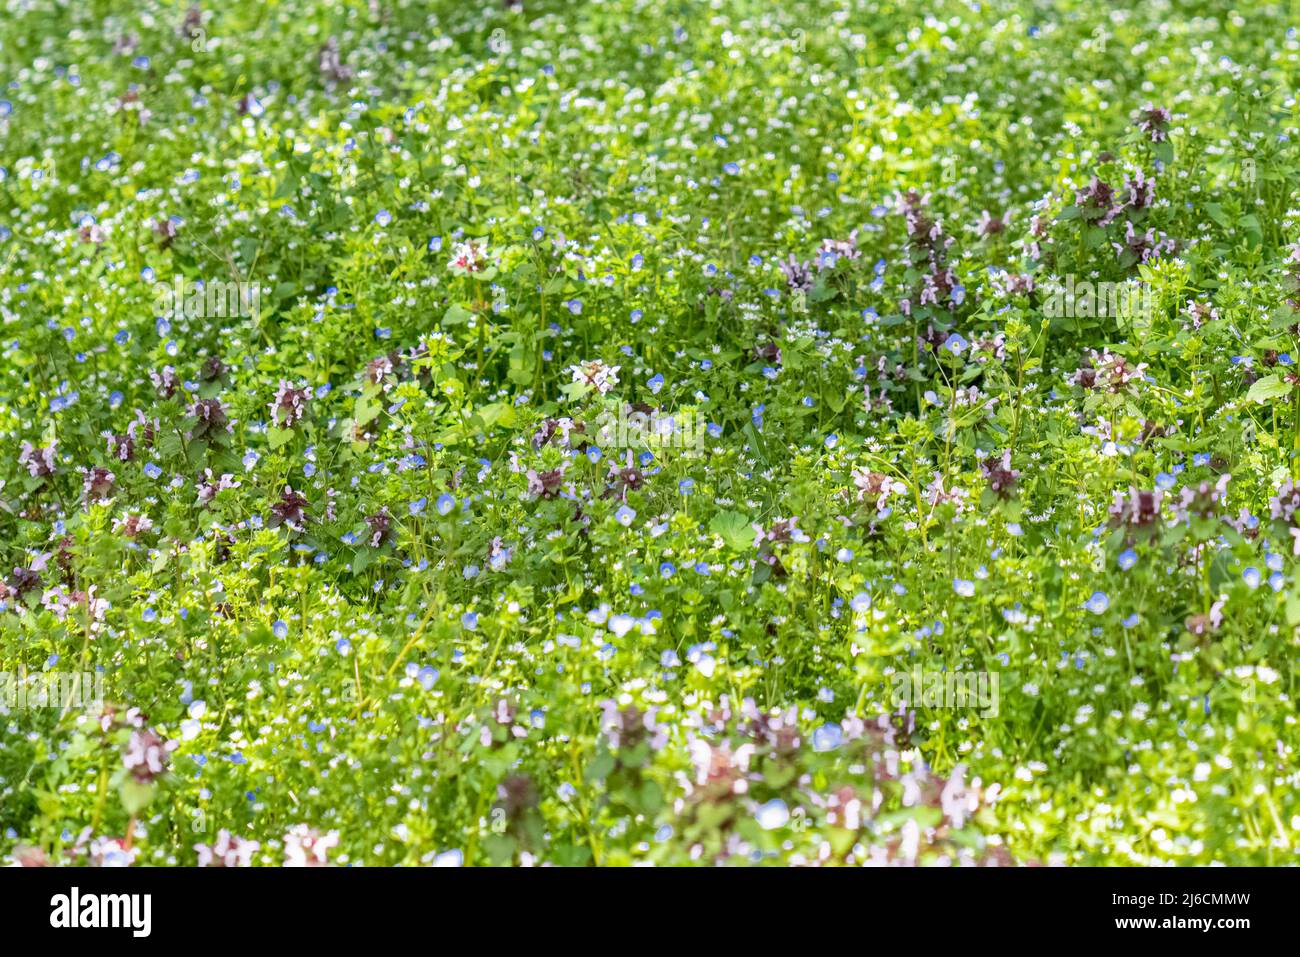 Meadow Pink Flowers Growing on Field, Wild Small Flowers on the Green Grass Stock Photo